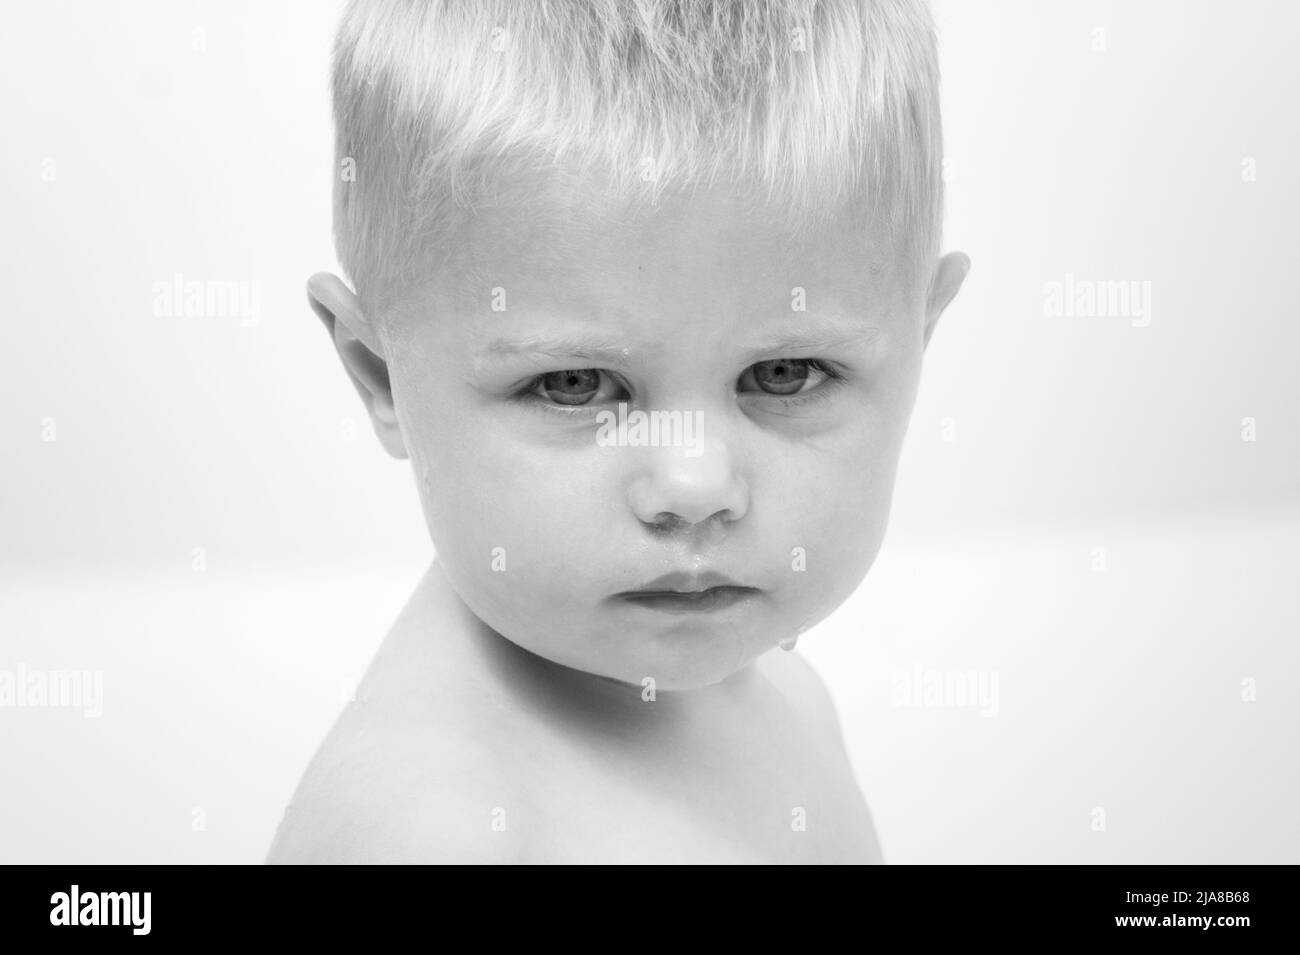 A young blonde boy stares directly at the camera with a serious look on his face Stock Photo